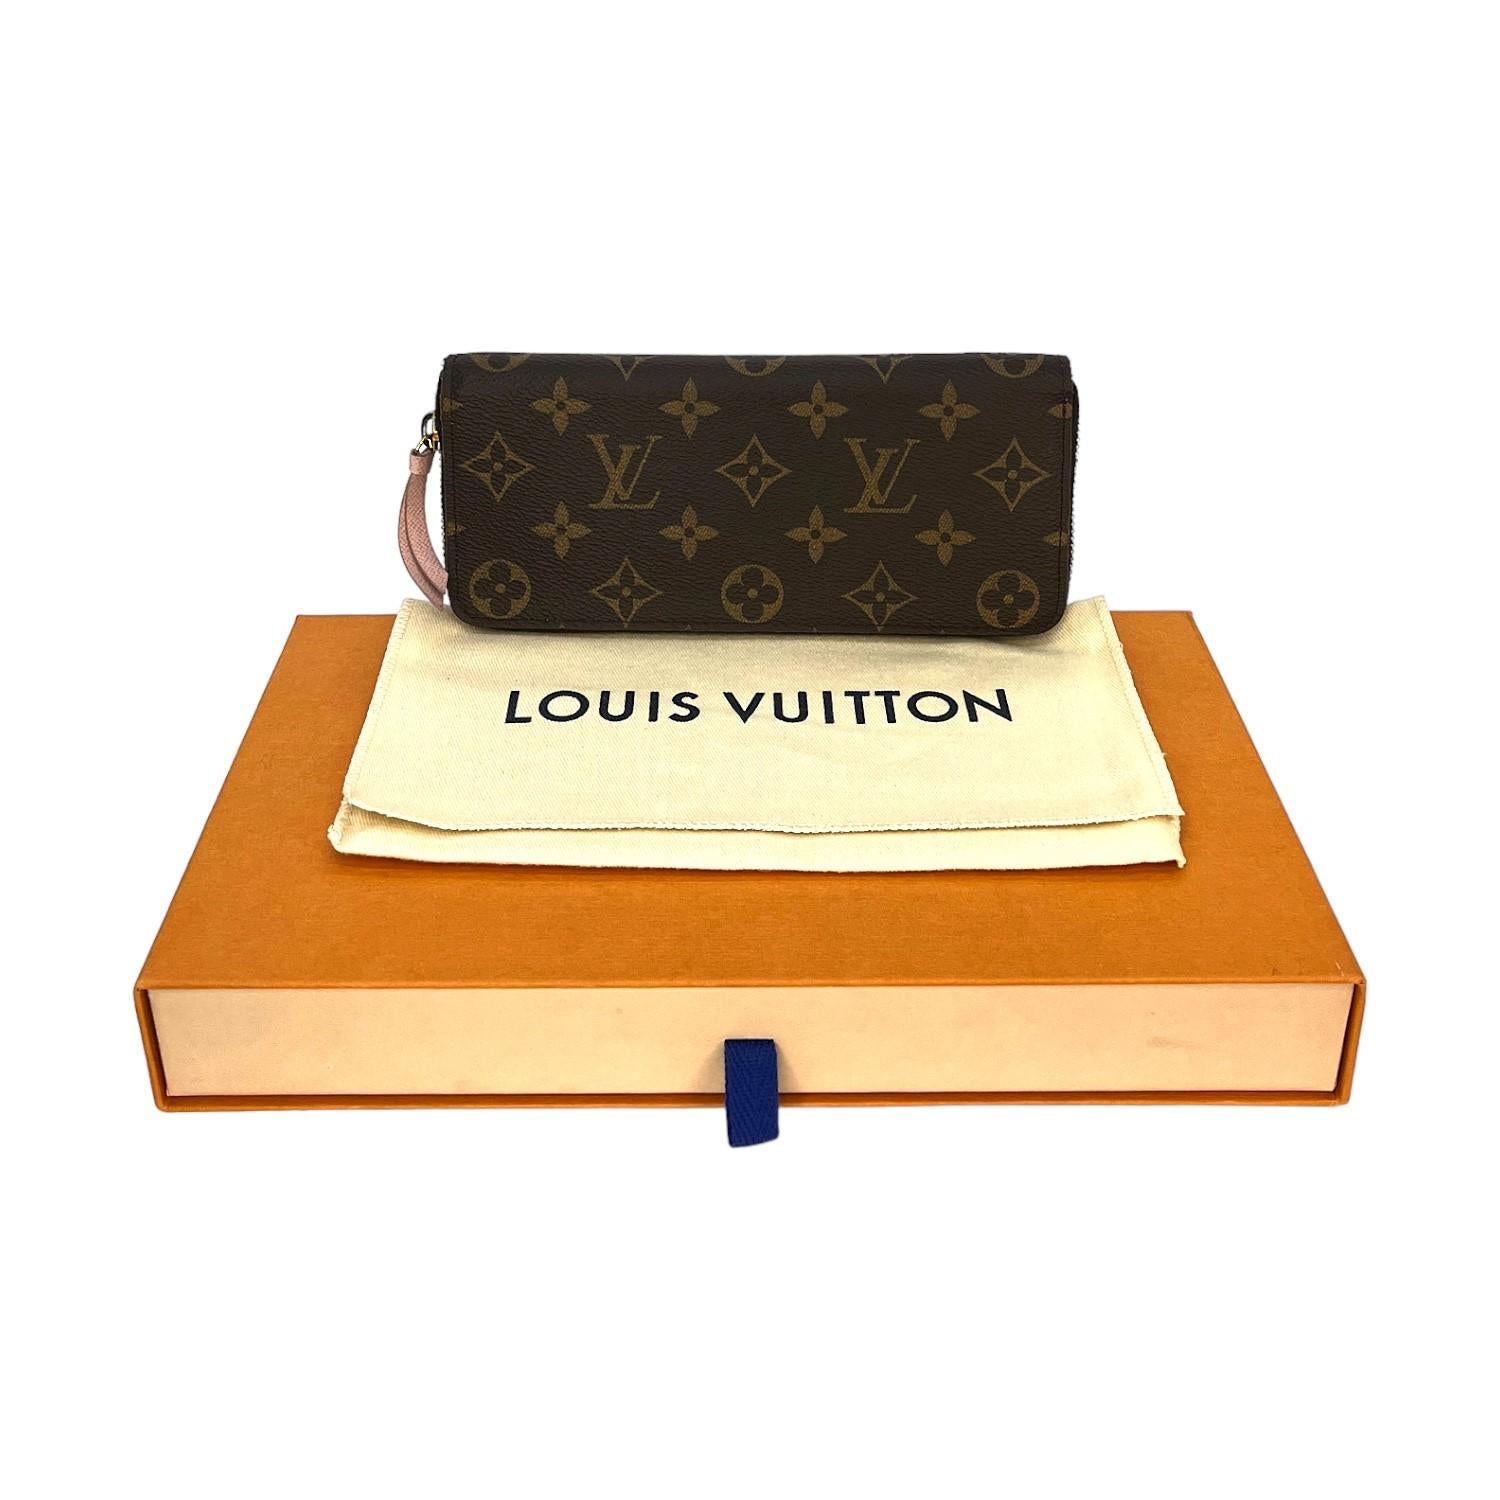 This Louis Vuitton Monogram Clemence Wallet is finely crafted of the iconic Louis Vuitton Monogram canvas exterior with leather trimming and gold-tone hardware features. It has a zipper closure that opens up to a pink leather interior with a zipper